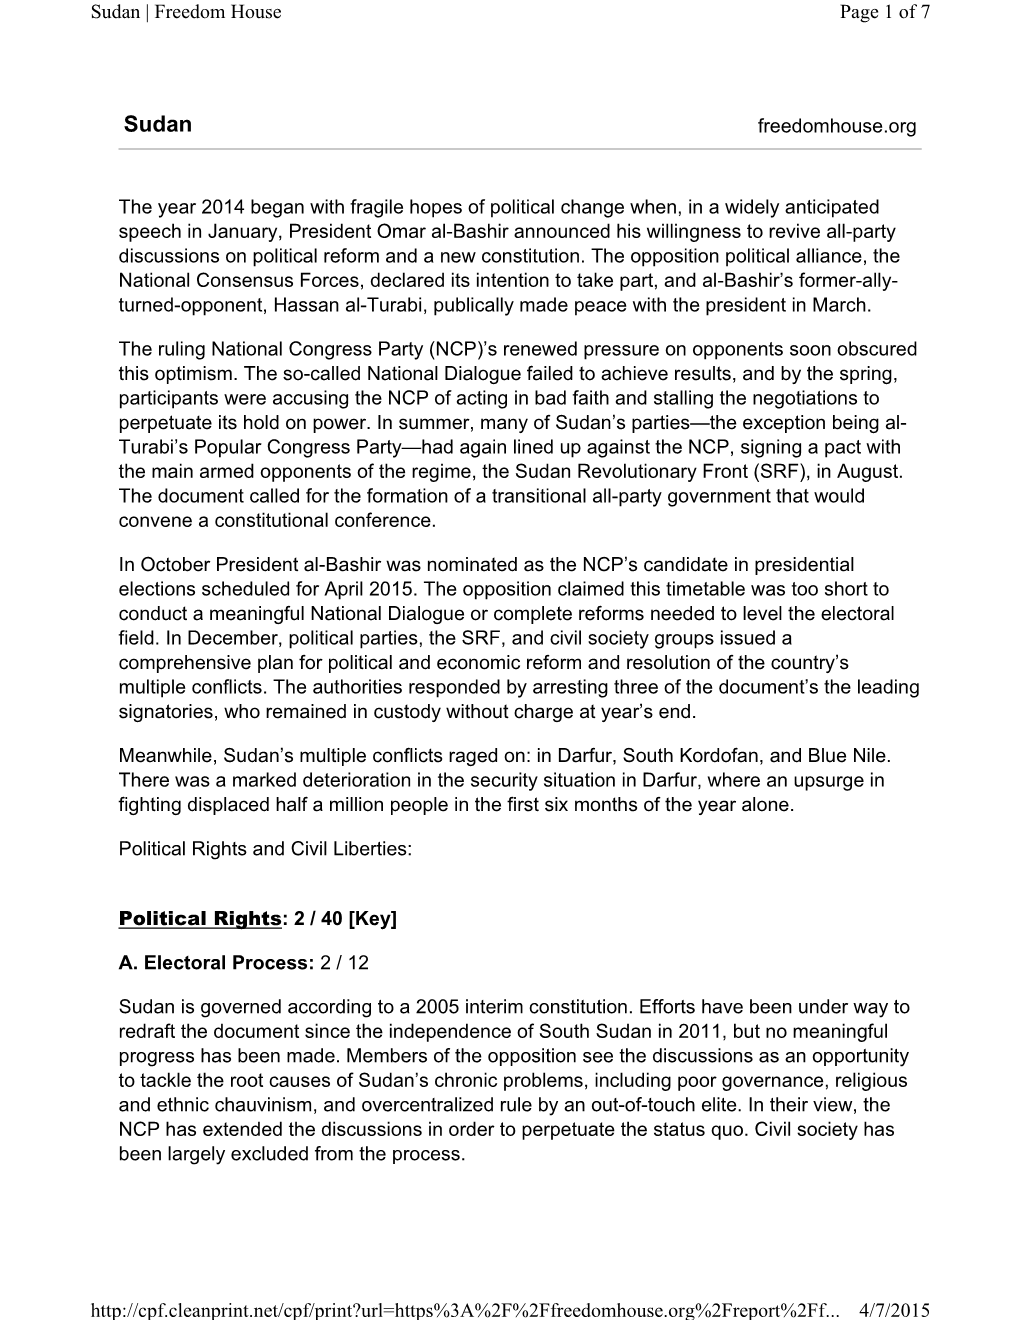 Page 1 of 7 Sudan | Freedom House 4/7/2015